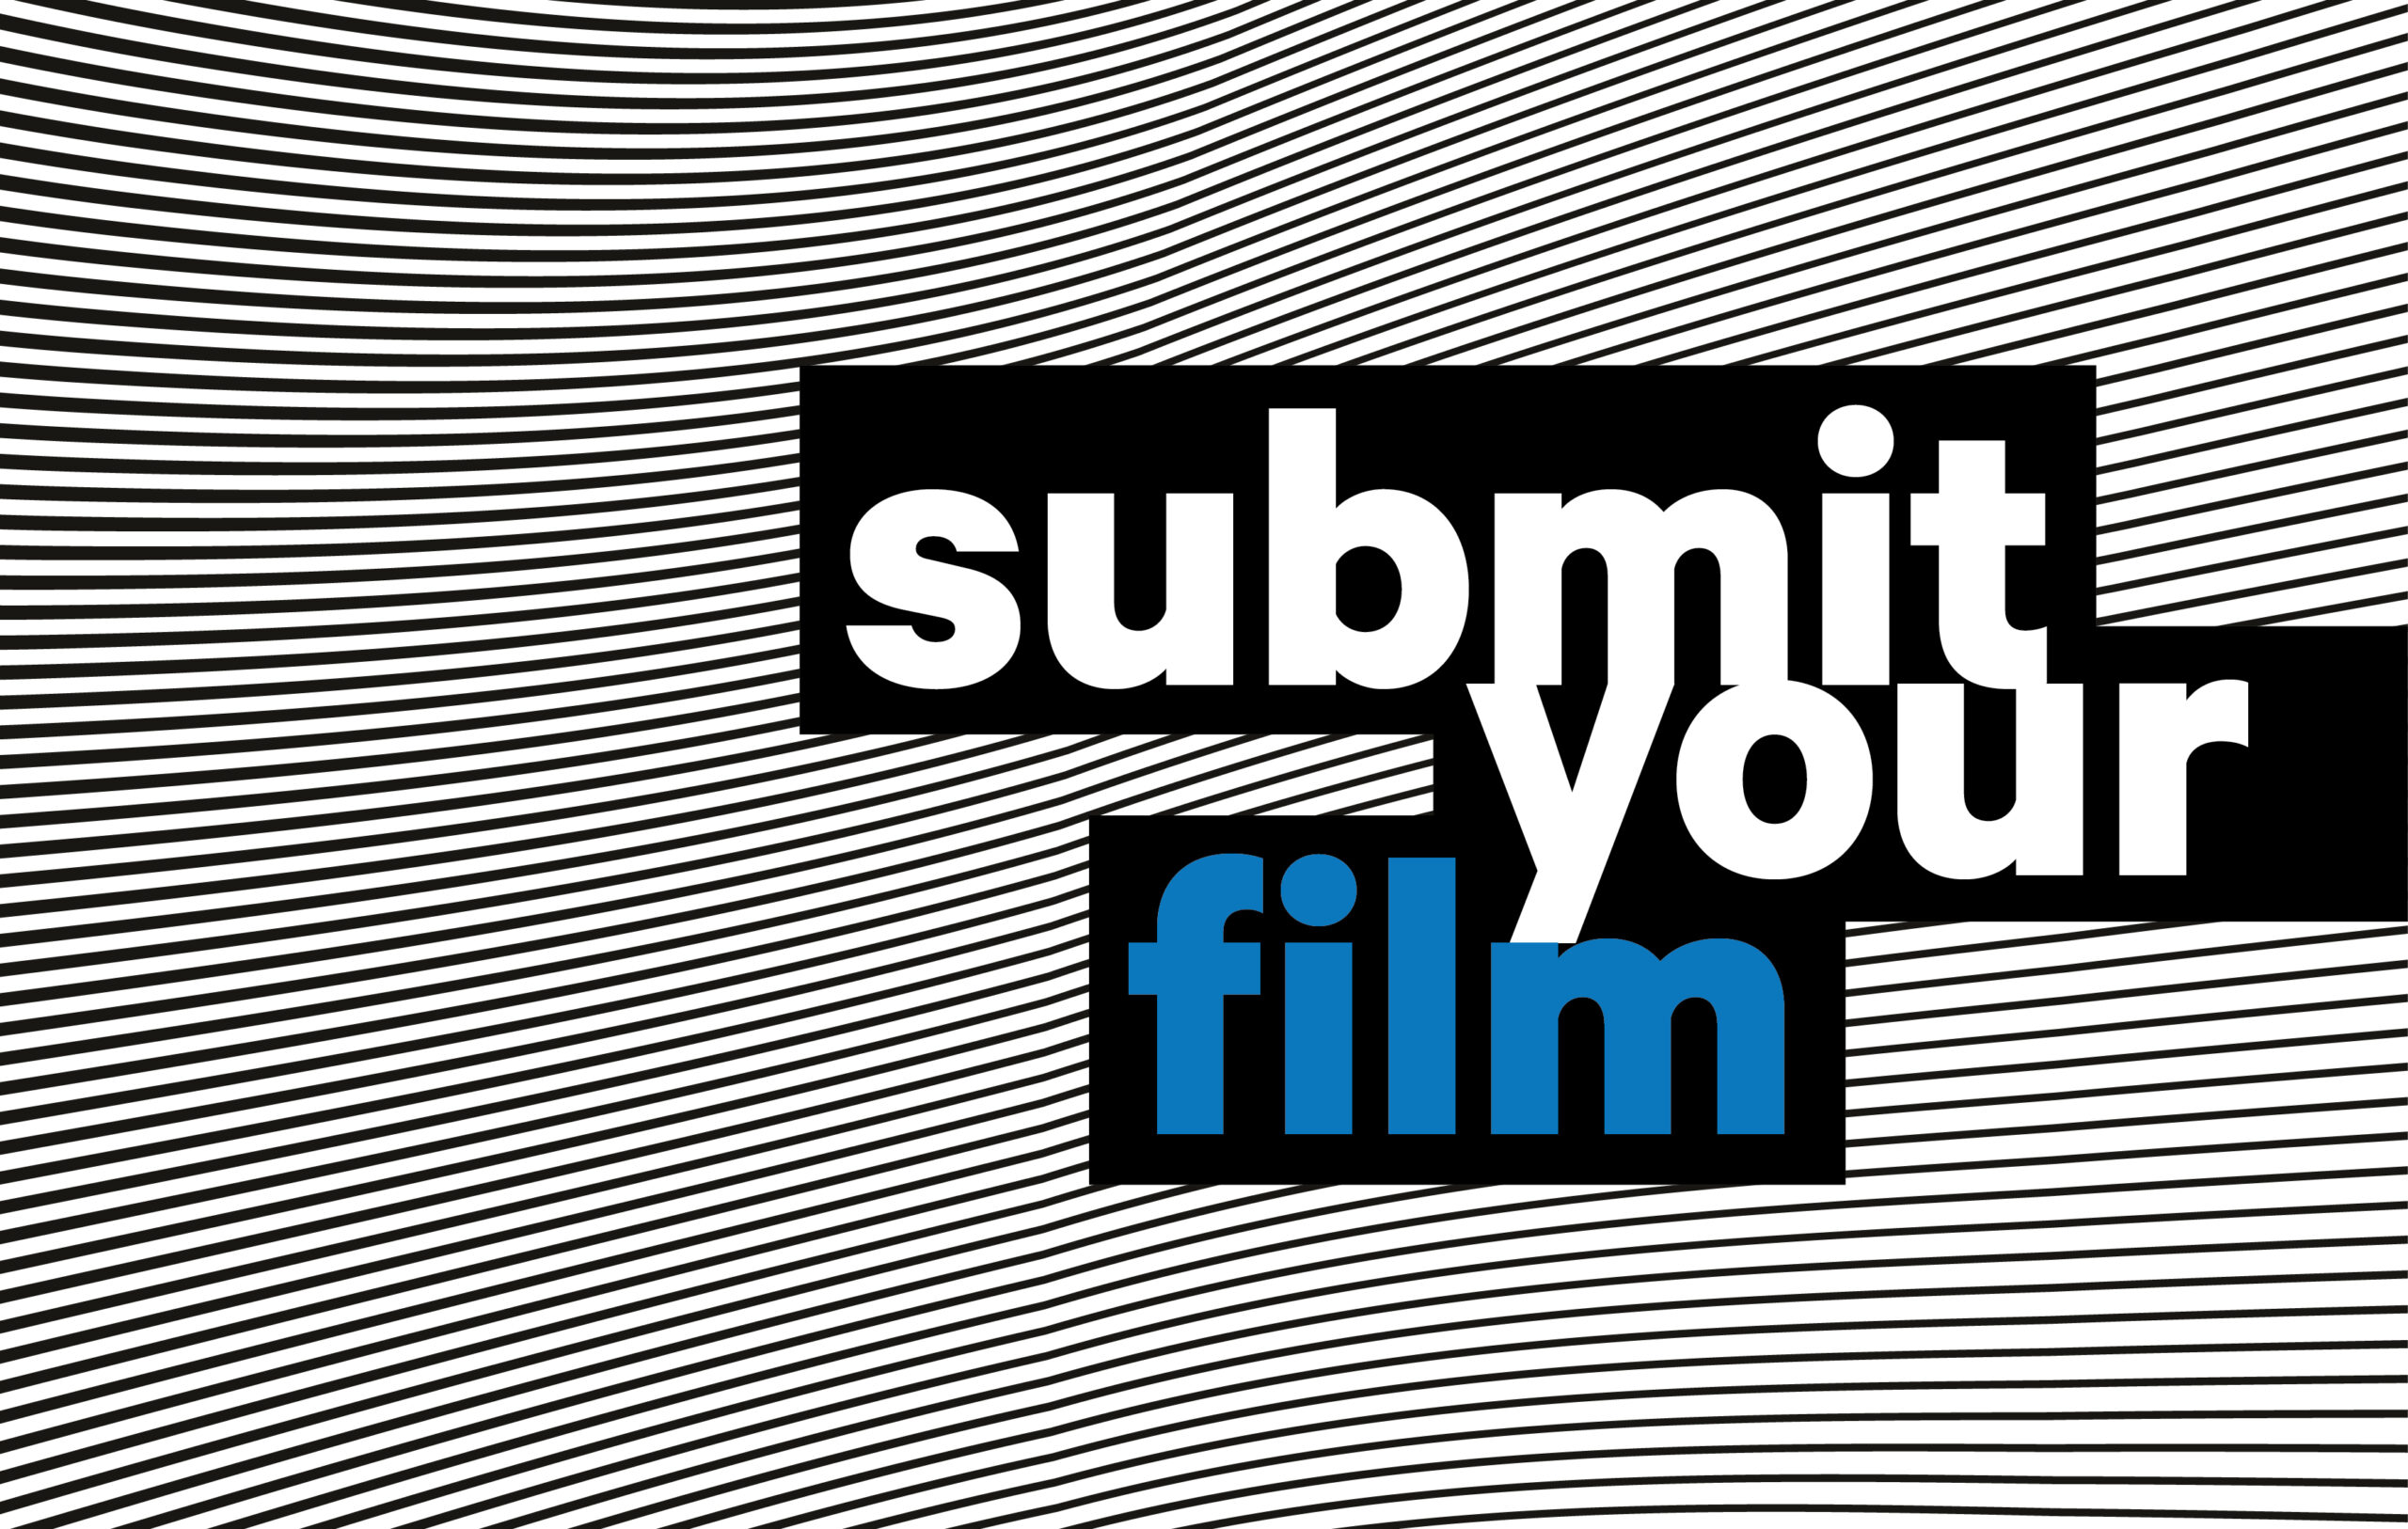 SUBMIT YOUR FILM!